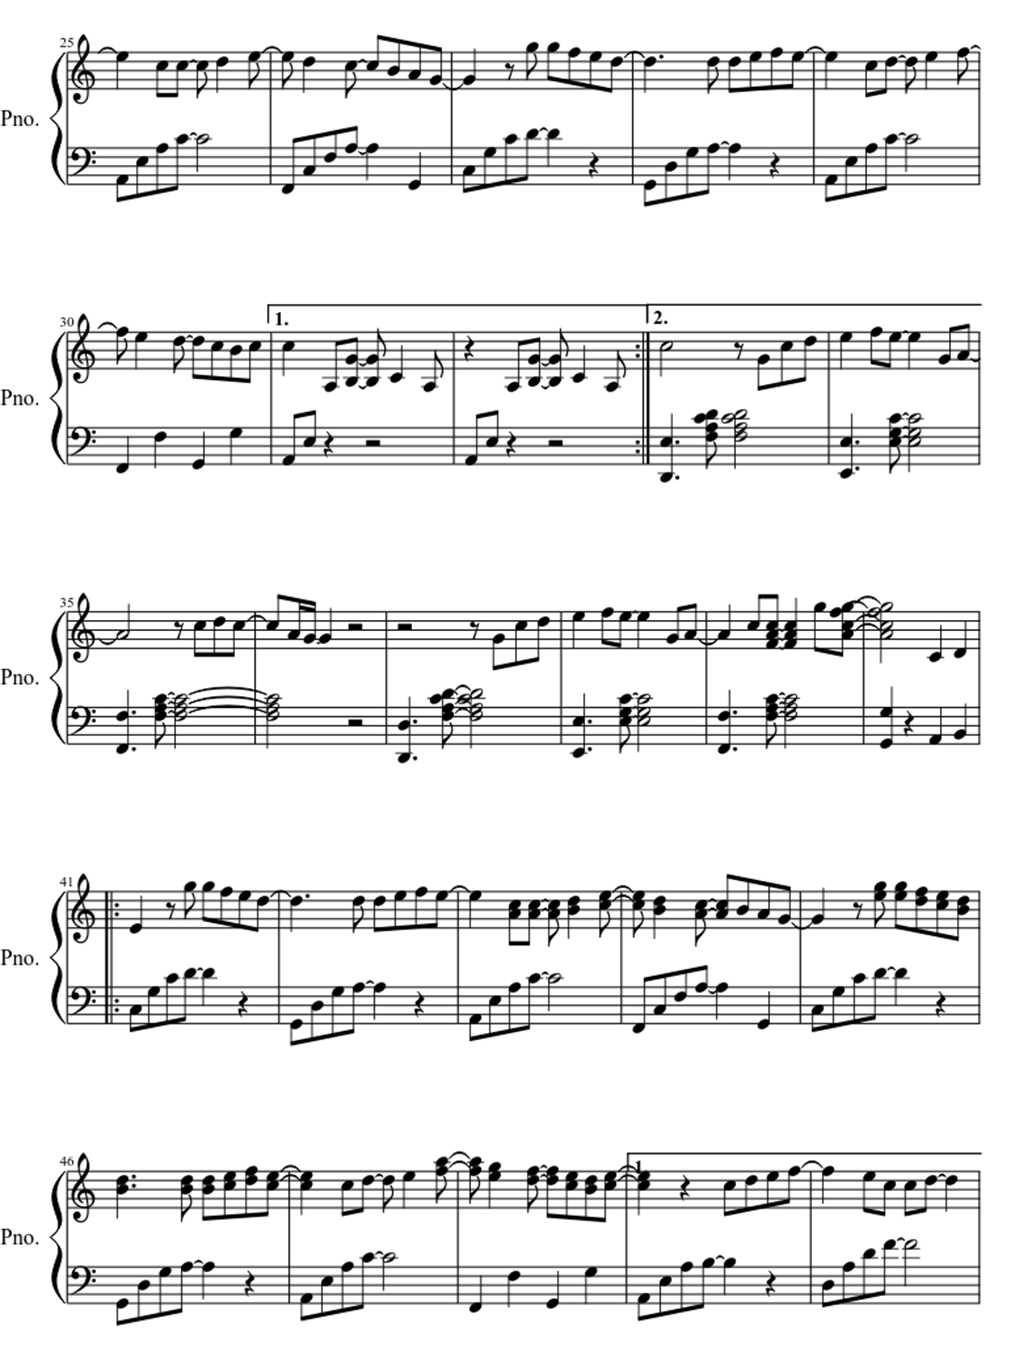 Right here waiting sheet music notes 2